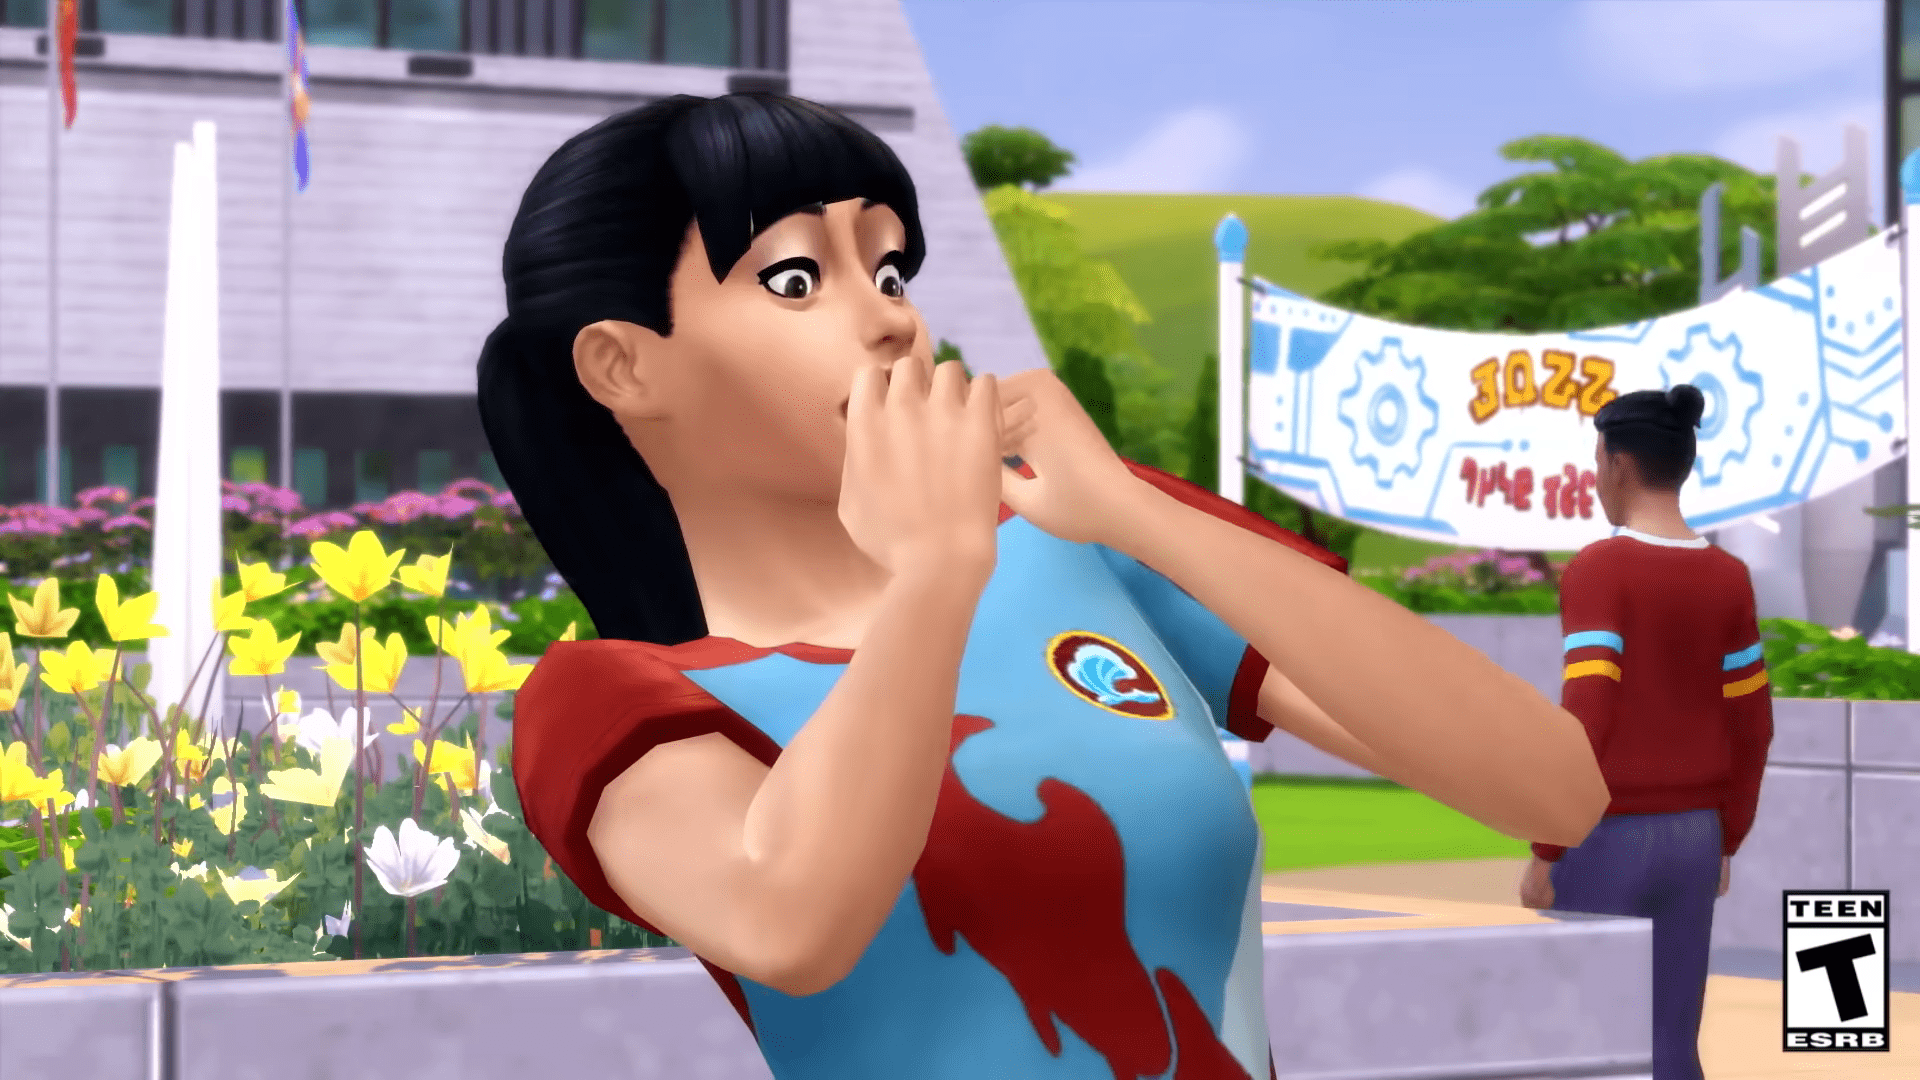 The Sims 4 Fans Purchased A Placeholder Expansion Pack Through Origin Without Knowing What It Contained